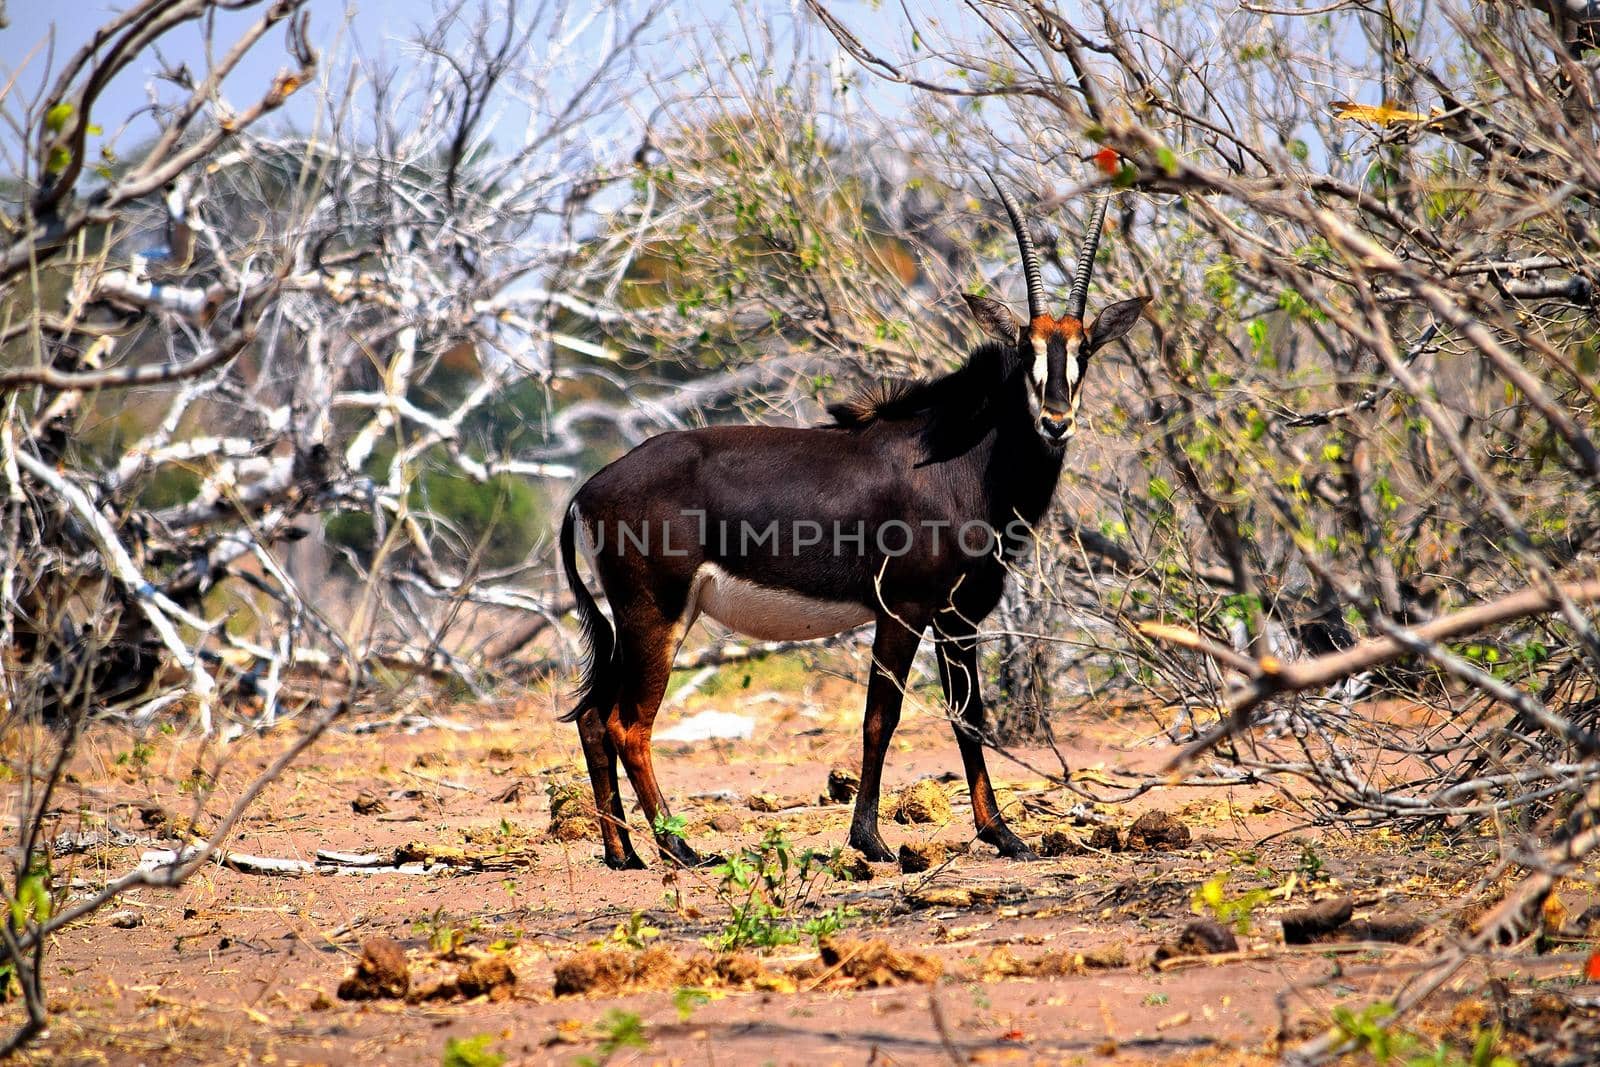 A sable antelope in Chobe National Park by silentstock639